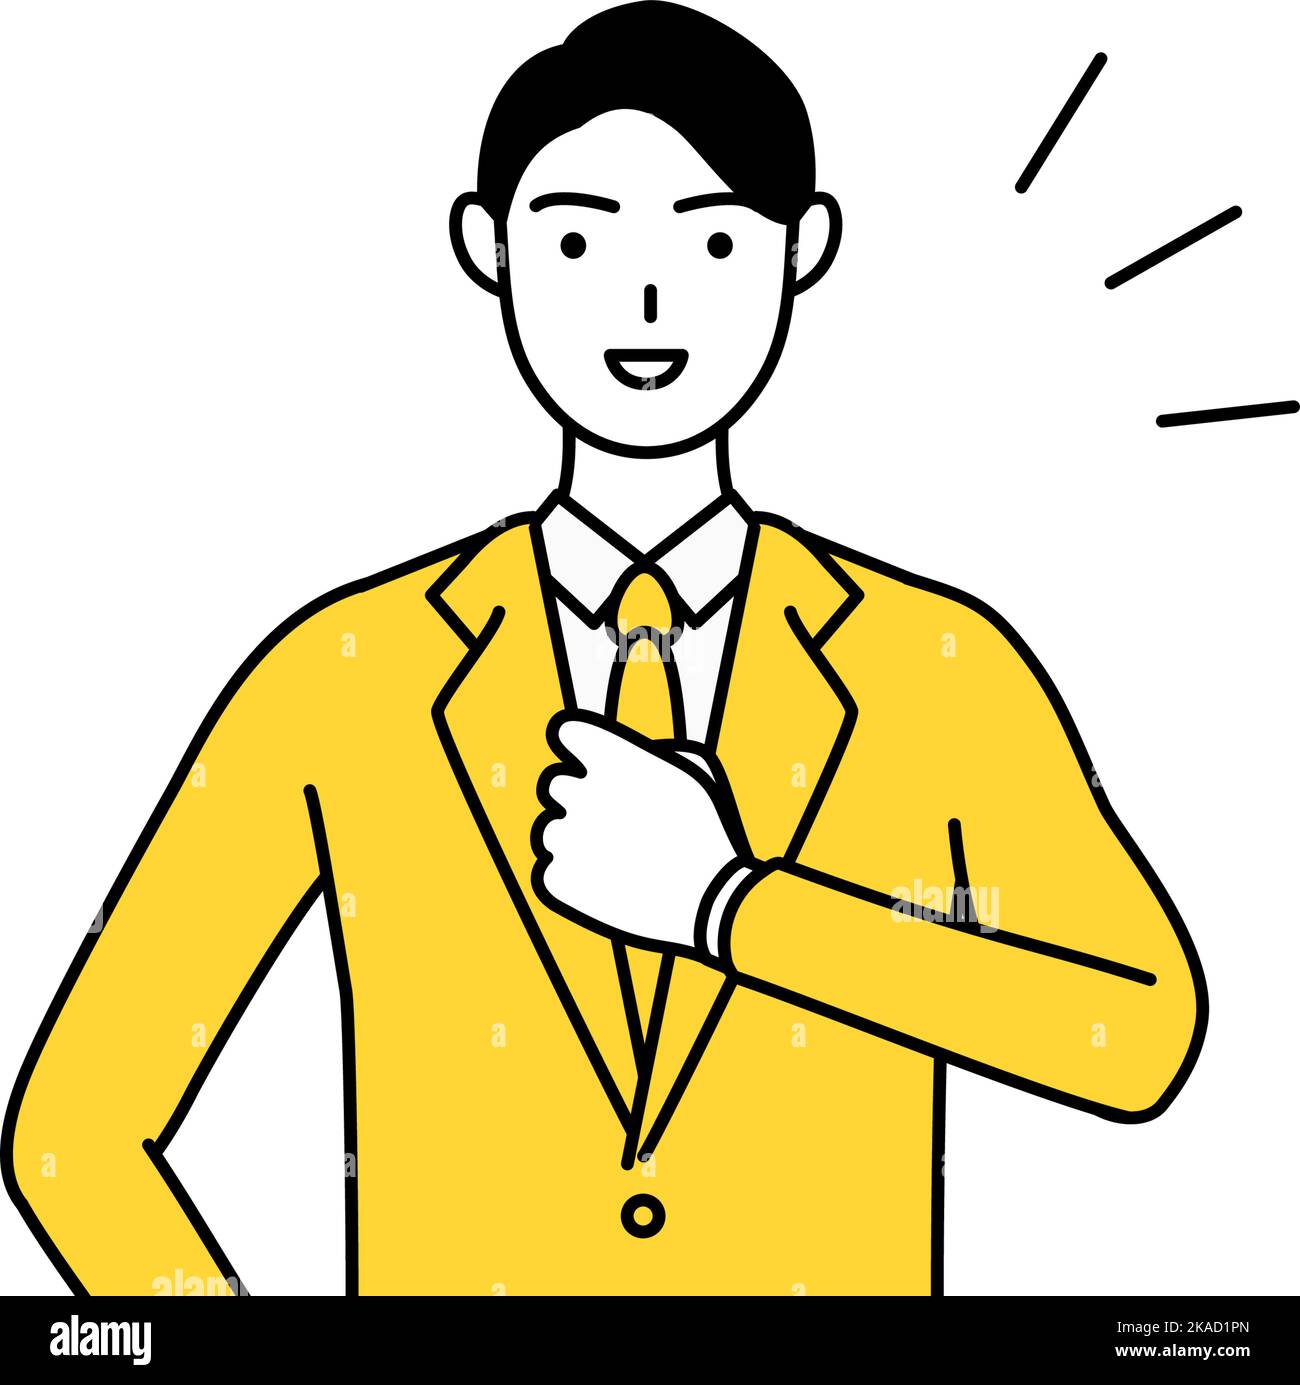 Simple line drawing illustration of a businessman in a suit tapping his chest. Stock Vector